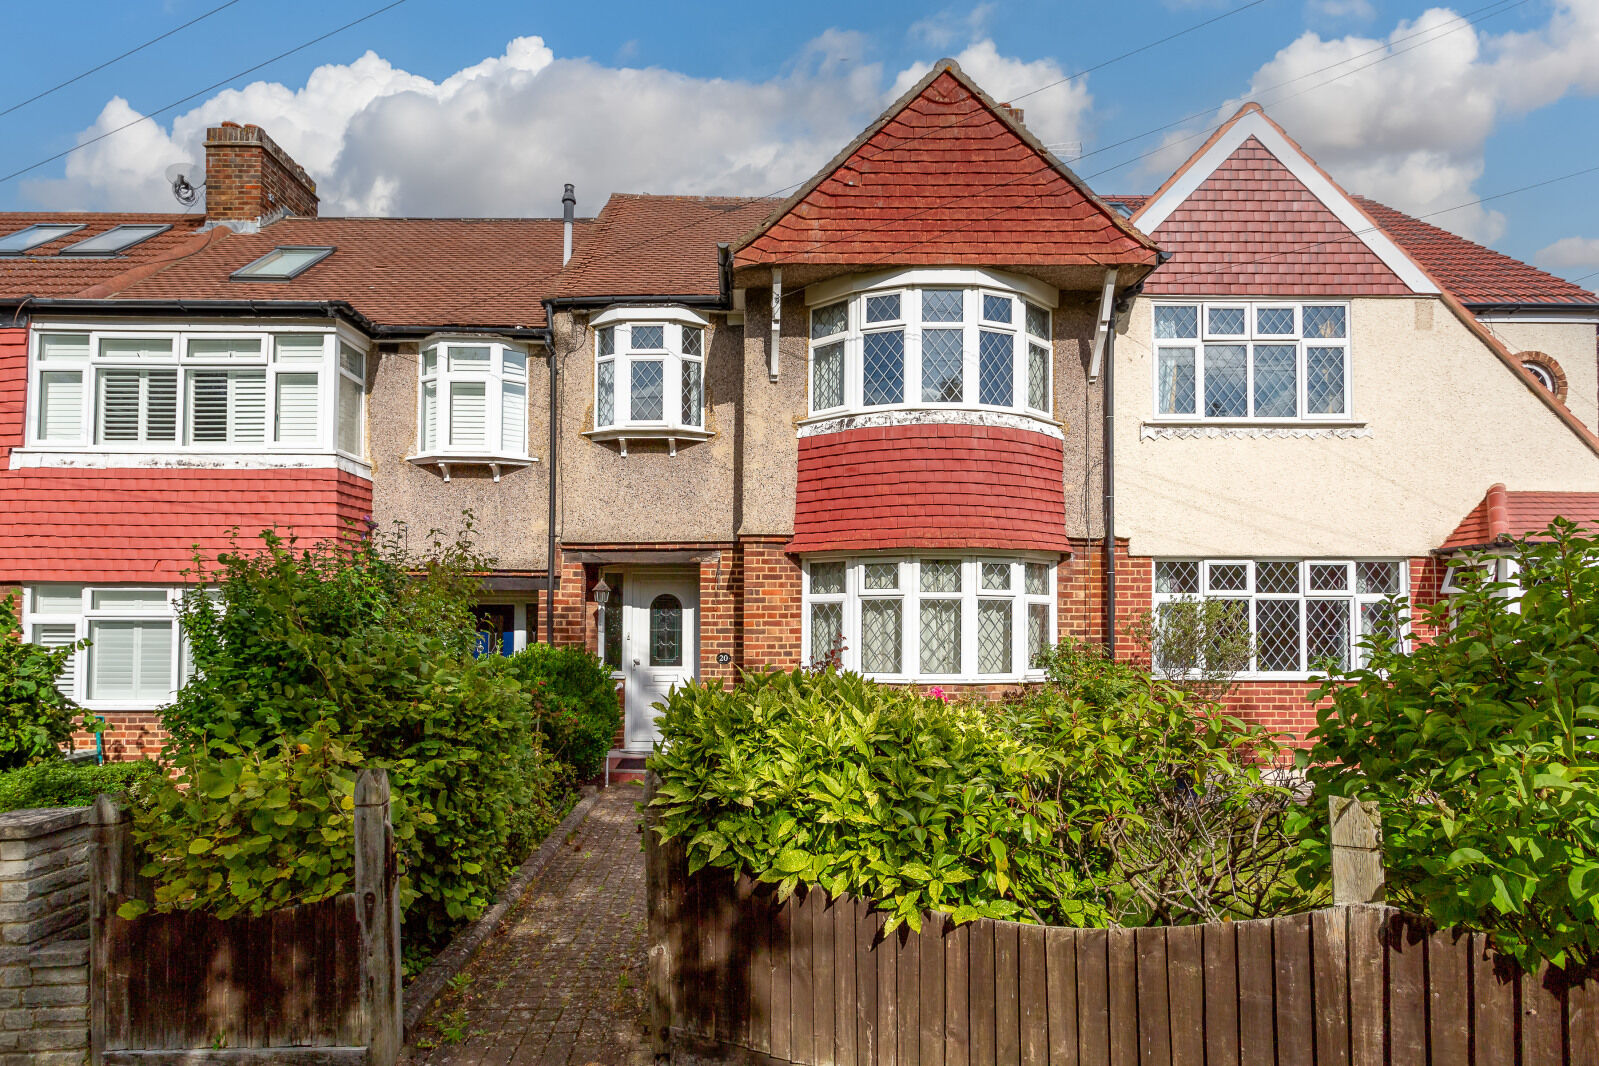 4 bedroom mid terraced house for sale Woodland Way, Morden, SM4, main image